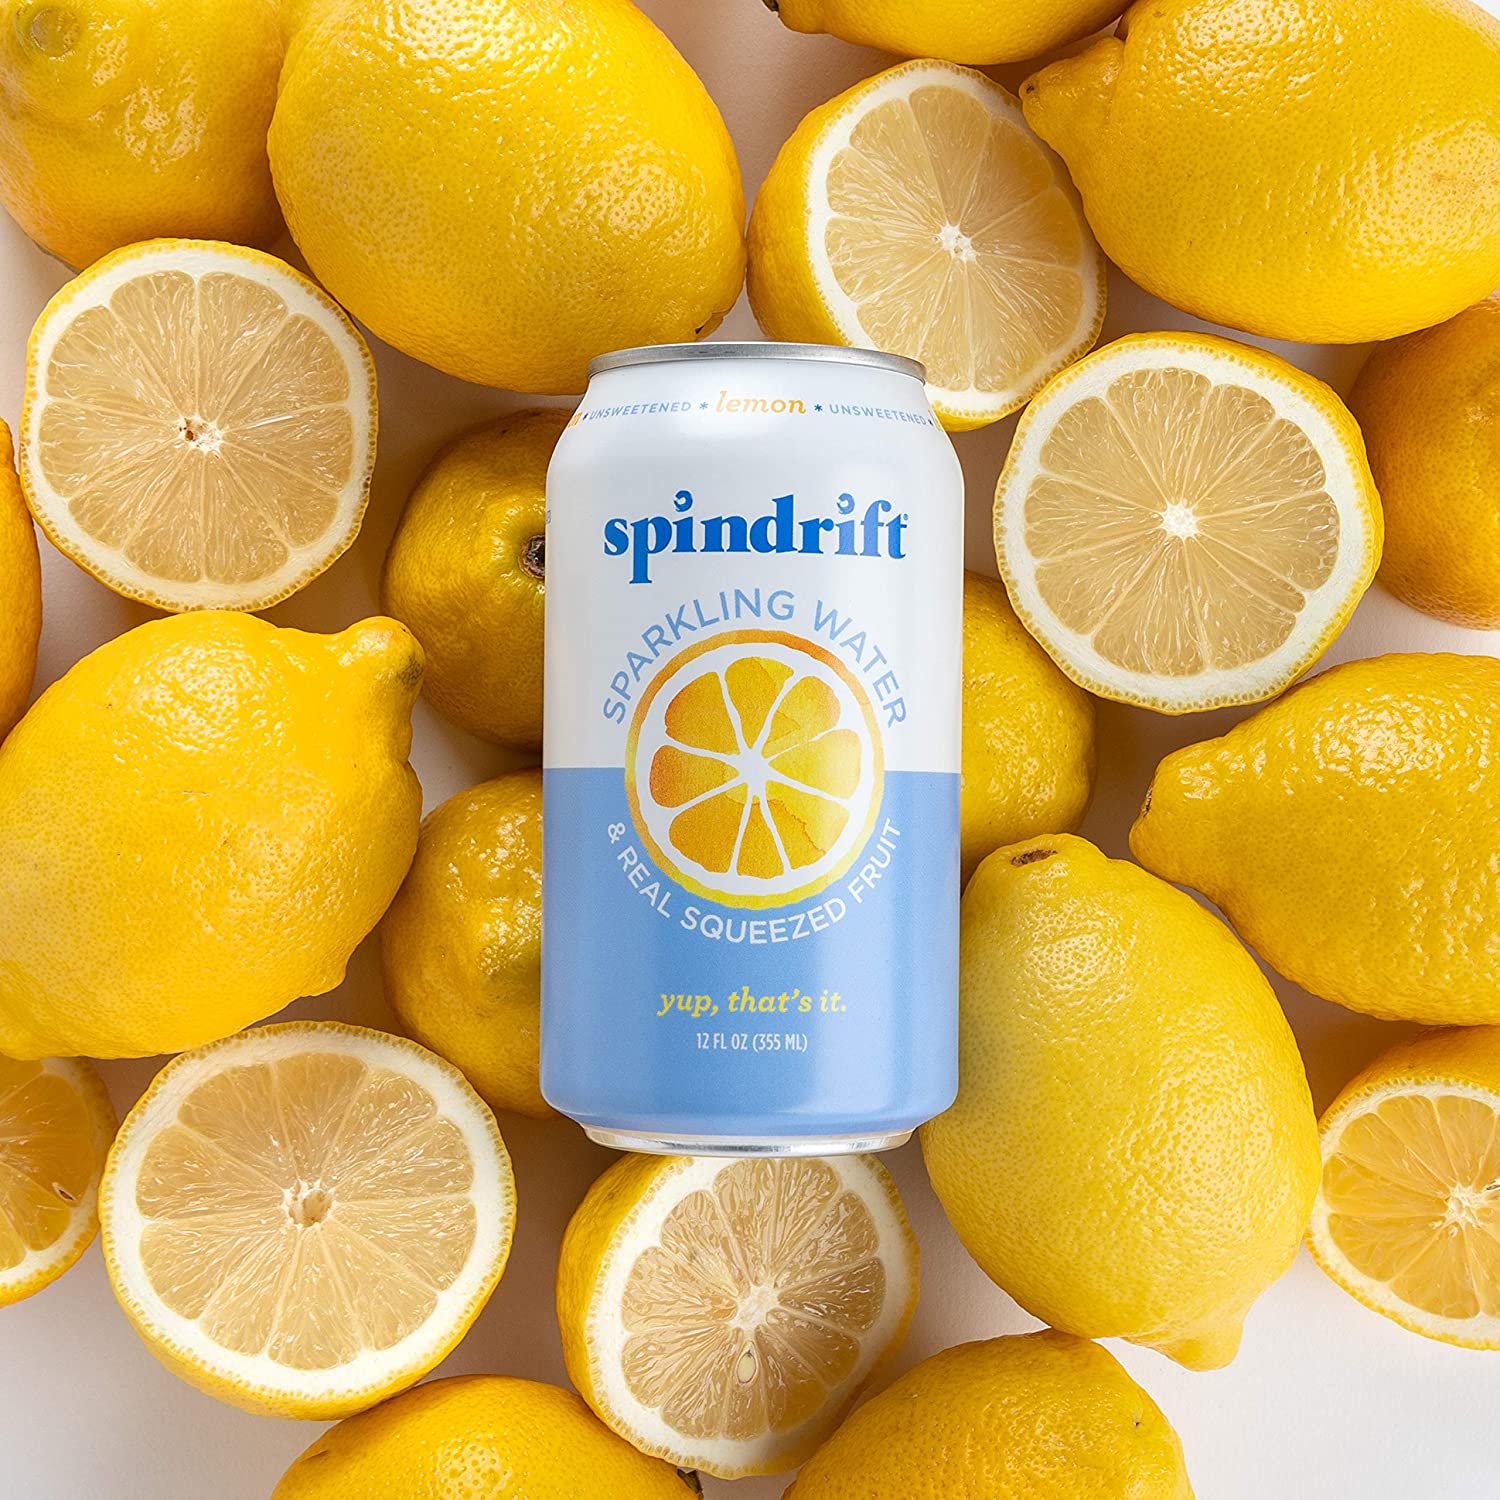 Spindrift Sparkling Water, Lemon Flavored, Made with Real Squeezed Fruit,12 fl oz, 8 Count, No Sugar Added, 3 Calories per Can - image 5 of 7